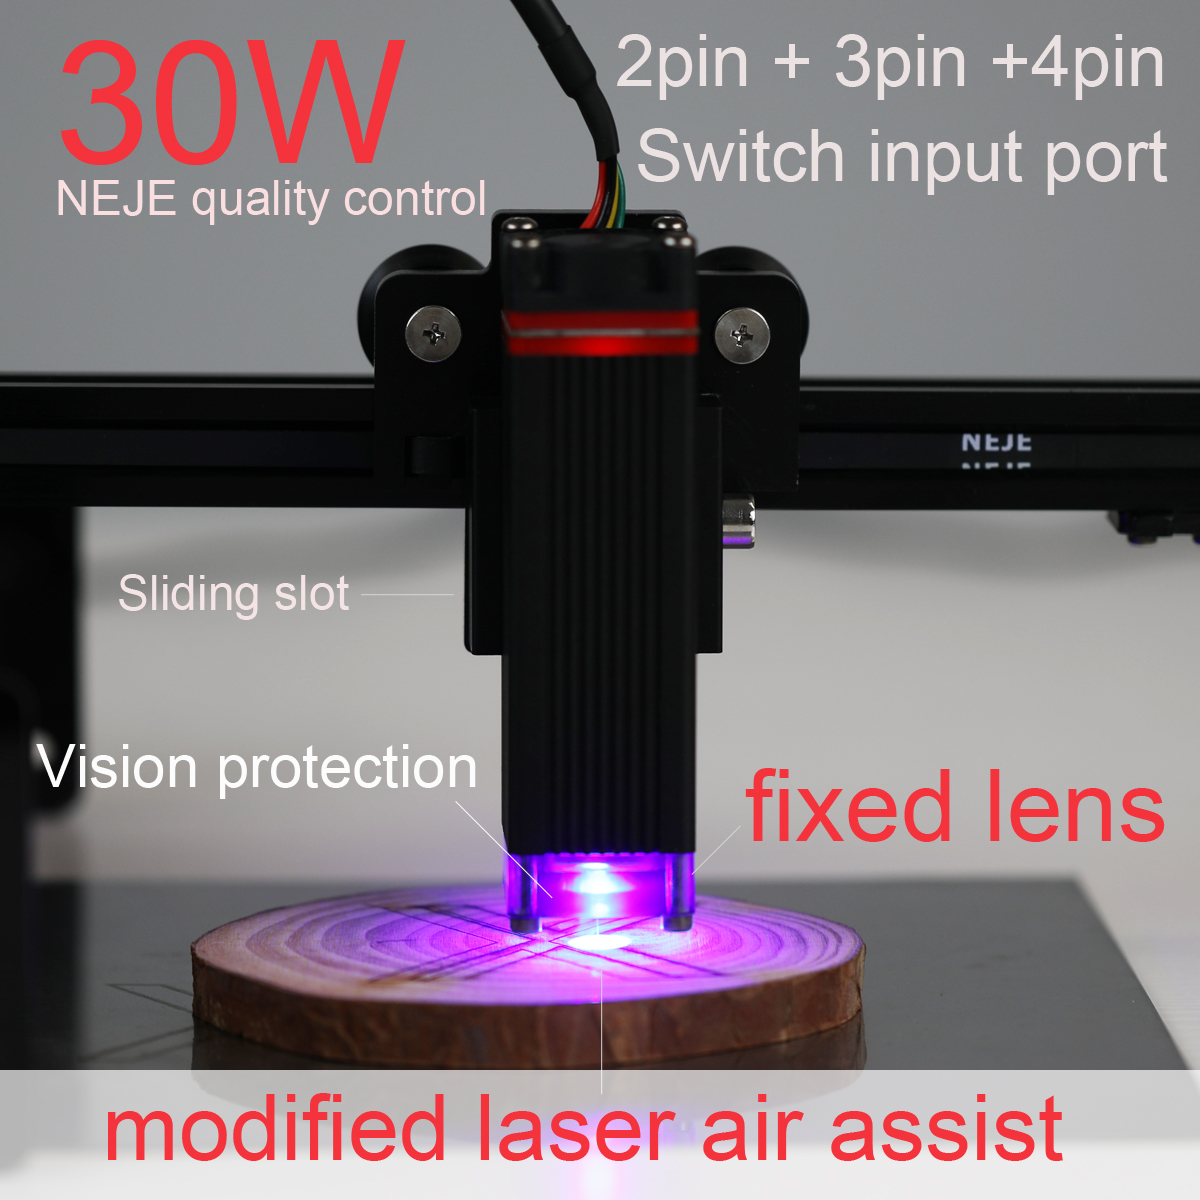 NEJE-30W-Laser-Cutting-Module-Fixed-Focusable-Lens-Vision-Protection-Modified-Laser-Air-Assist-For-L-1758629-1